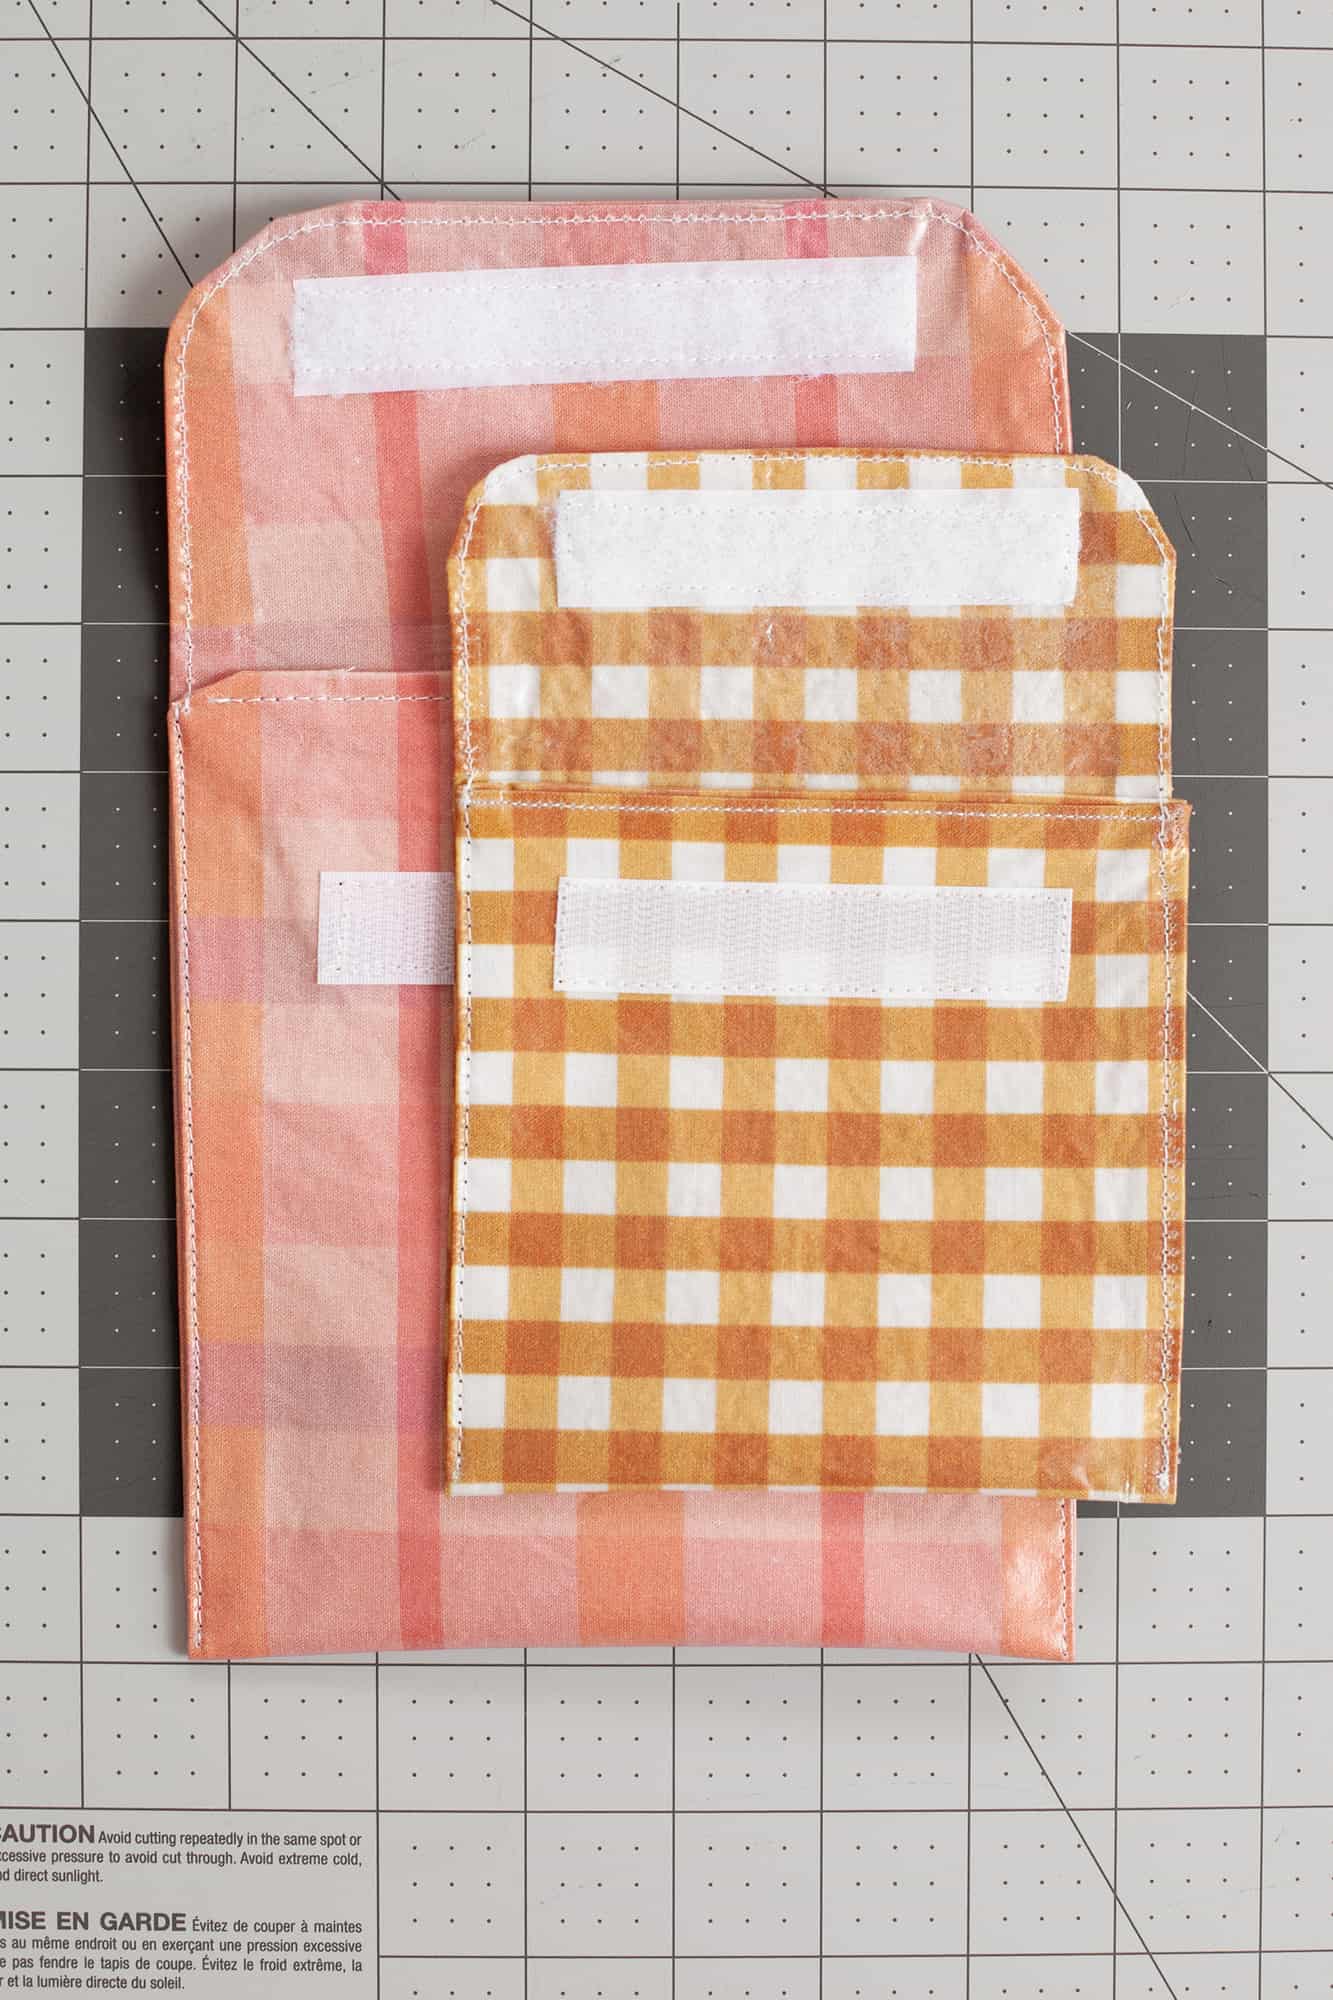 How to Make Fabric snack bags